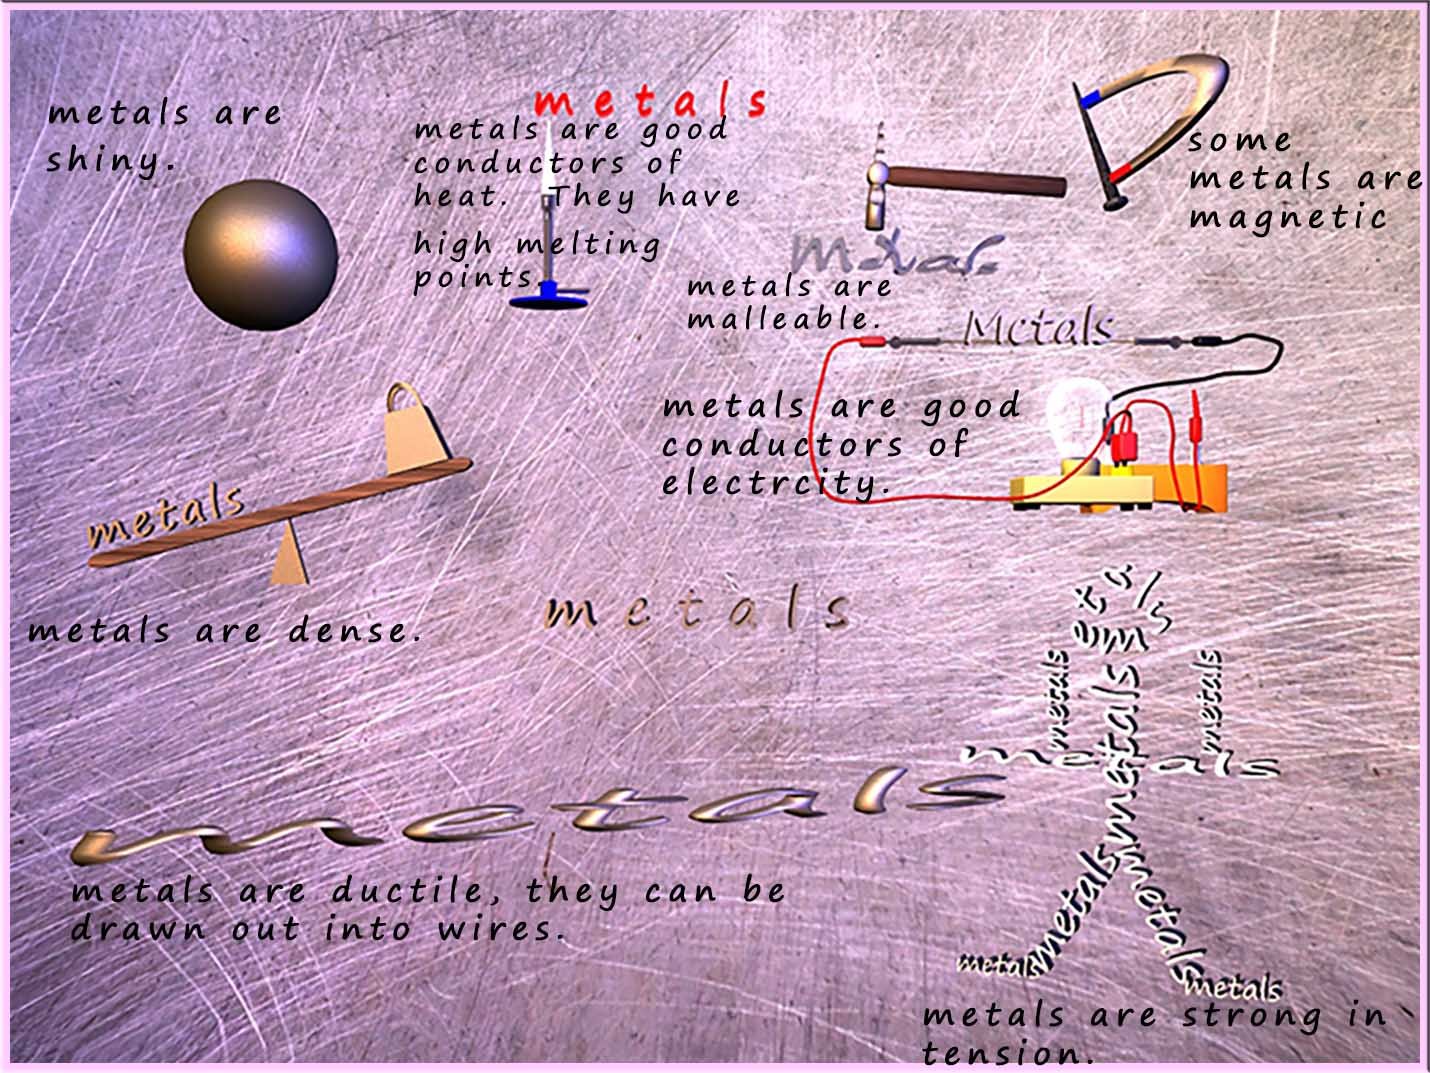 The physical properties of metals.